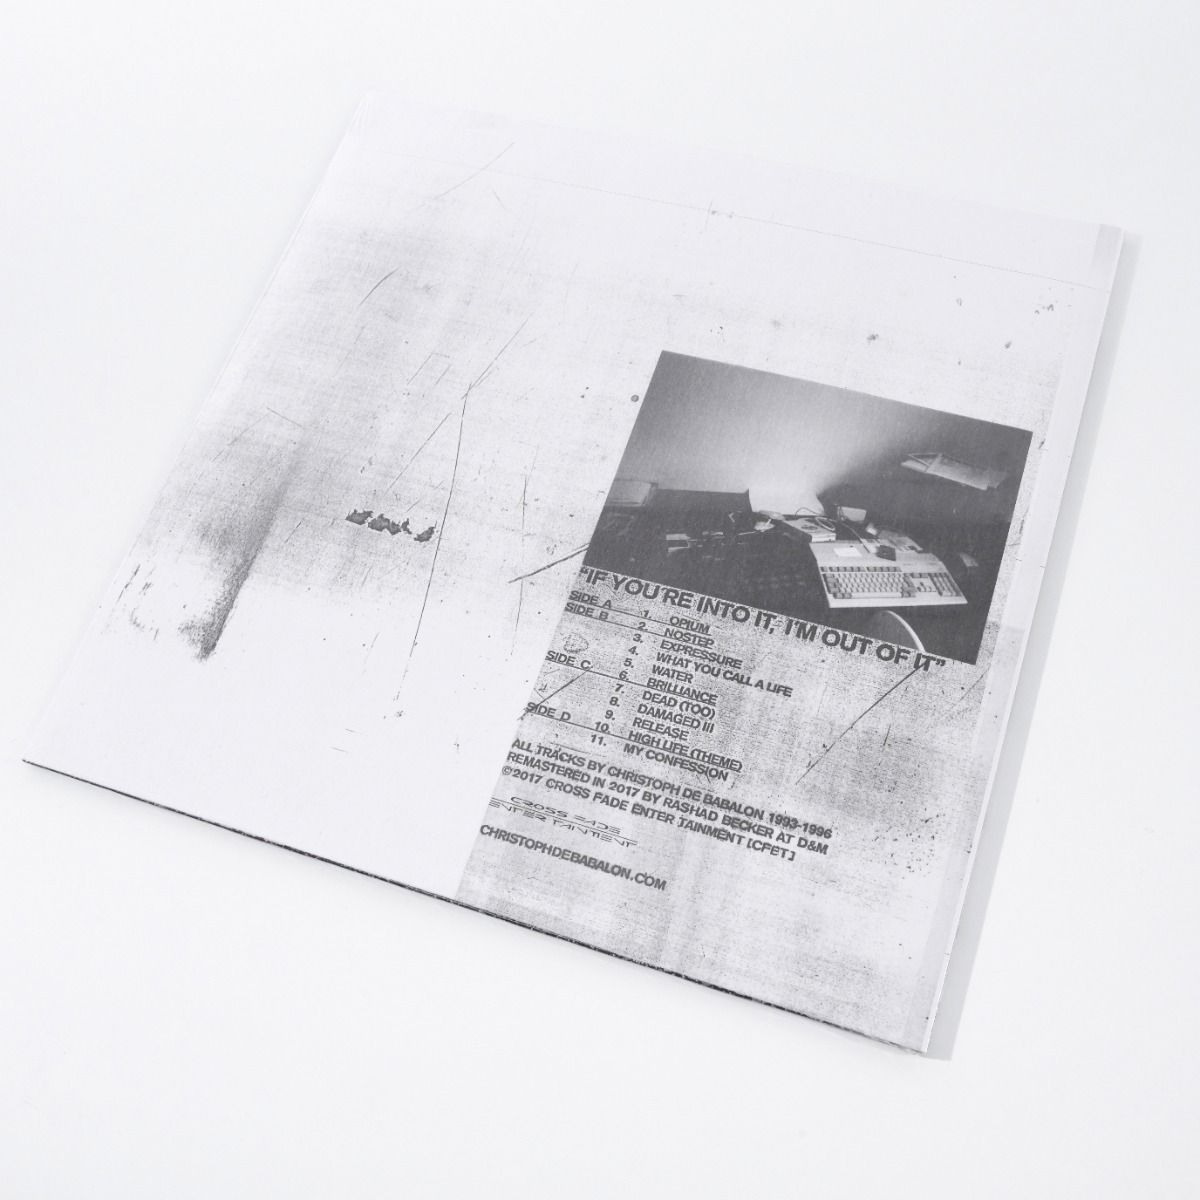 Christoph De Babalon - If You're Into It I'm Out Of It 2x12" LP (Clear Vinyl)